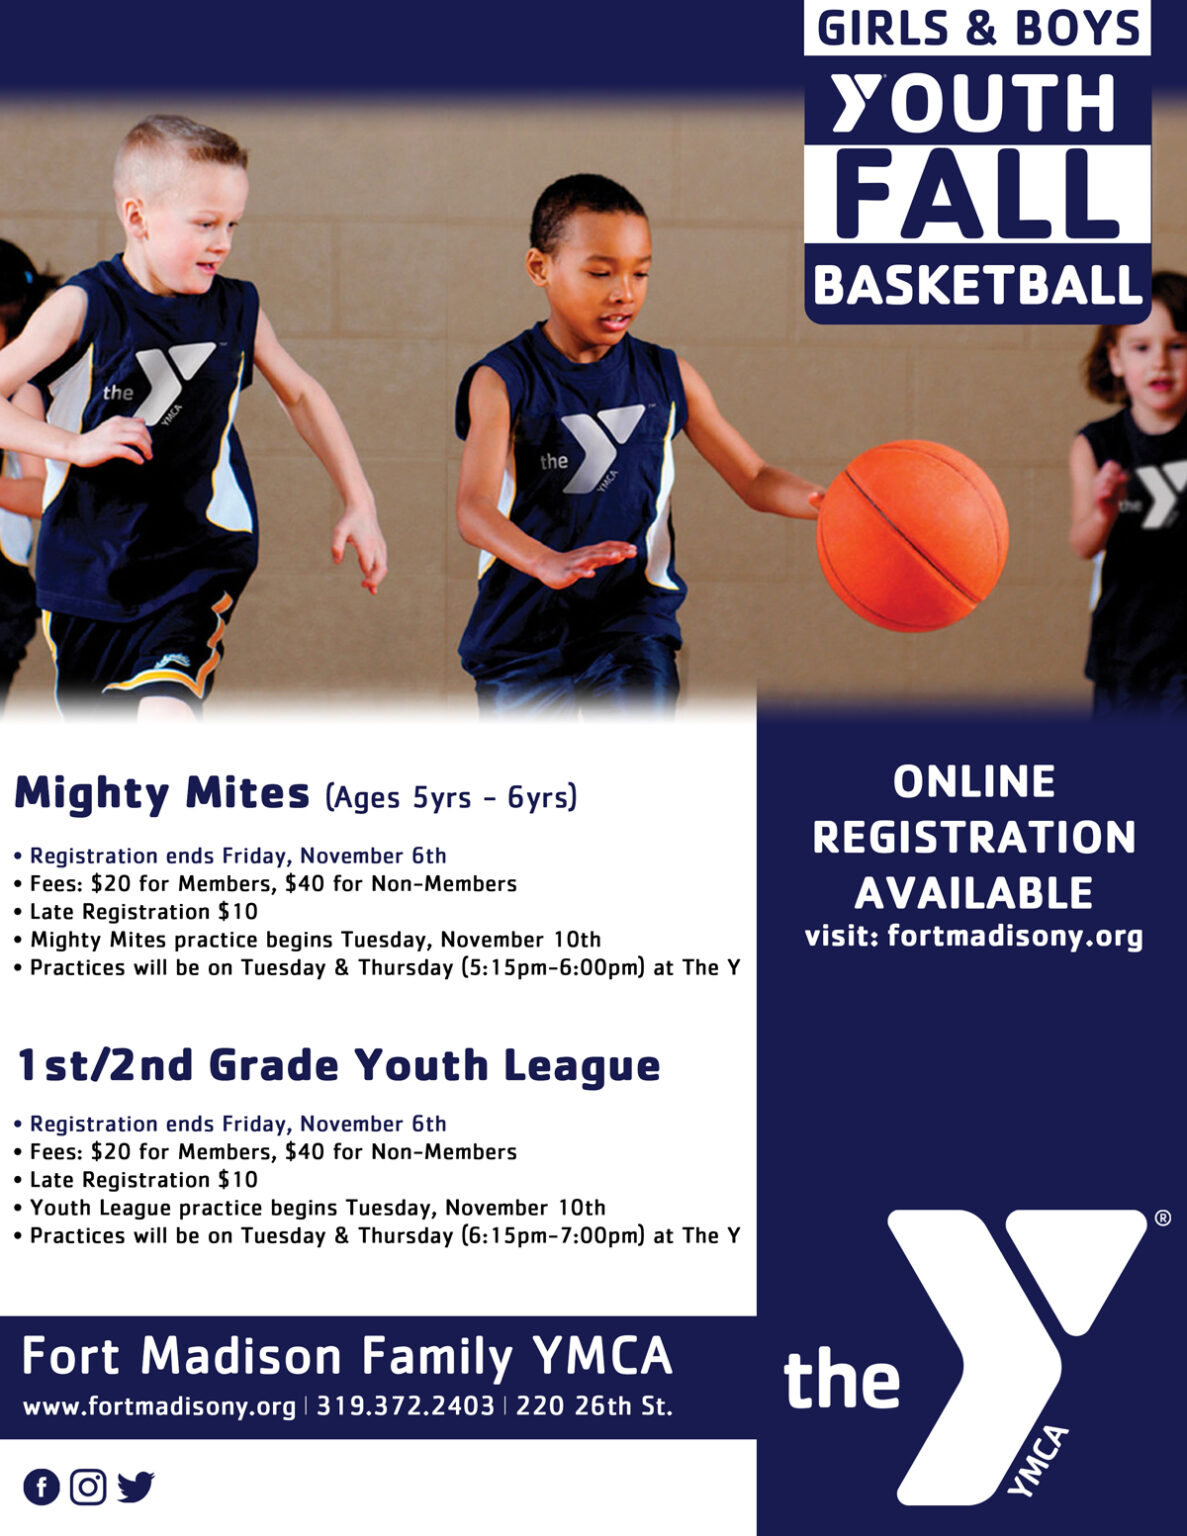 2020 Youth Basketball Leagues FORT MADISON FAMILY YMCA